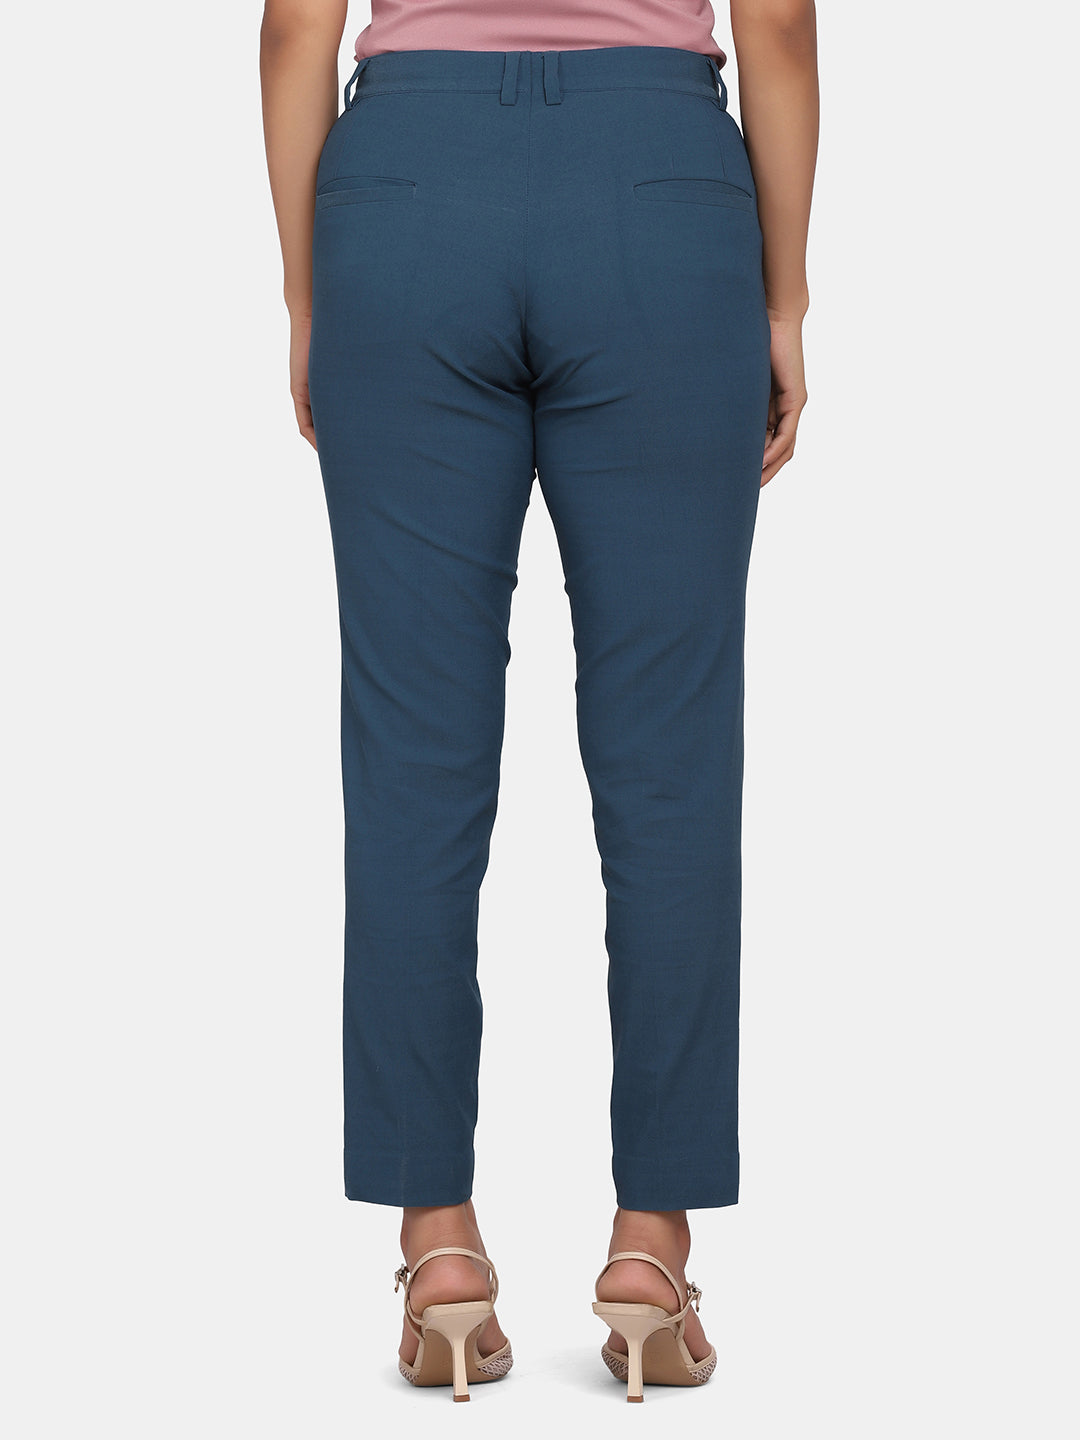 Toko Twill Formal Trousers for Women- Teal Blue